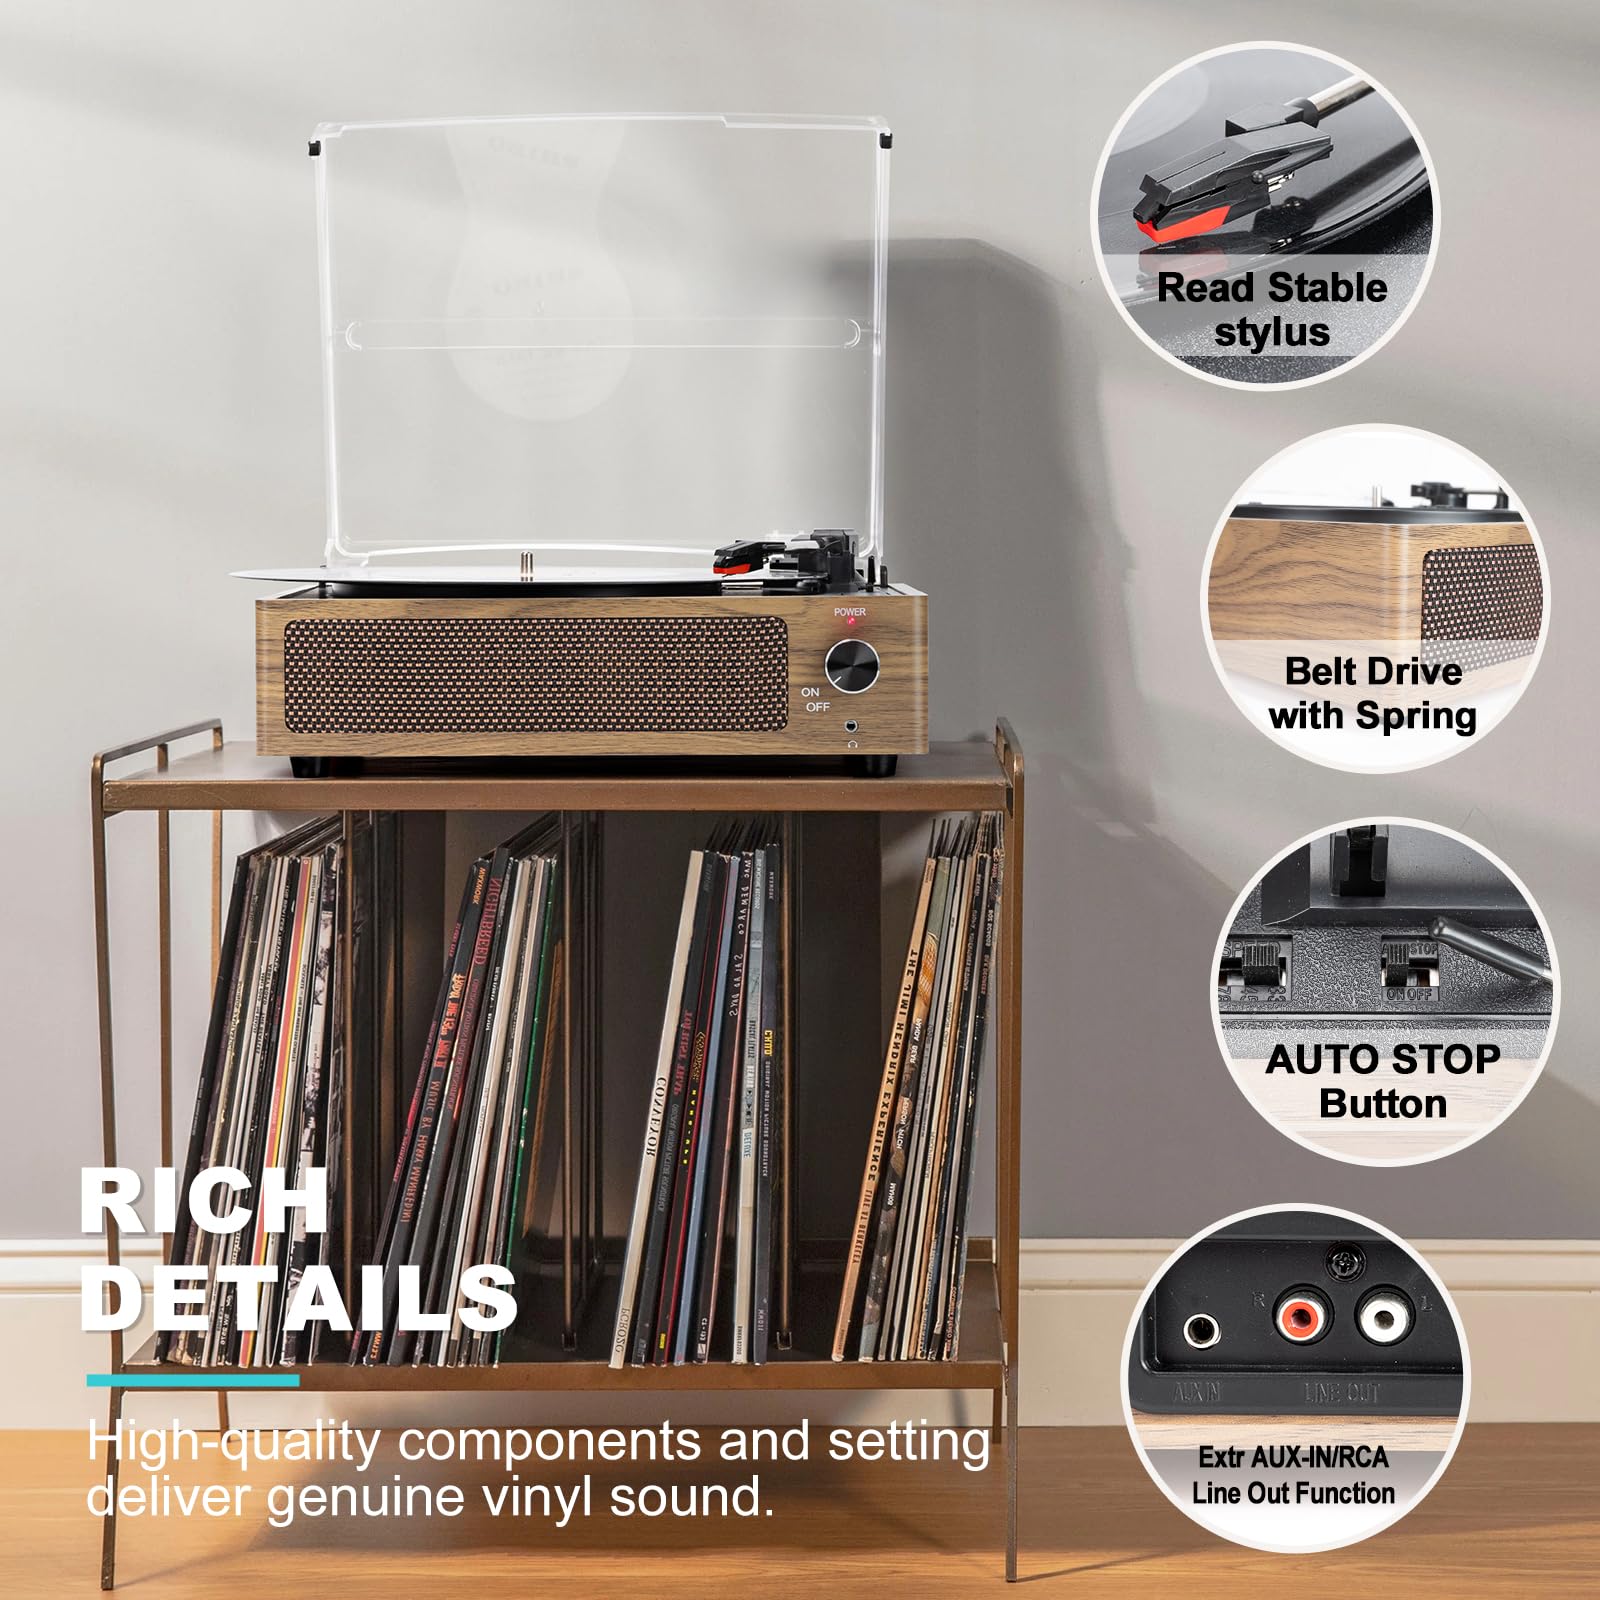 Vinyl Record Player with Speakers Vintage Turntable for Vinyl Records Belt-Driven Turntable Support 3-Speed, Wireless Playback, Headphone, AUX-in, RCA Line LP Vinyl Players for Sound Enjoyment Black